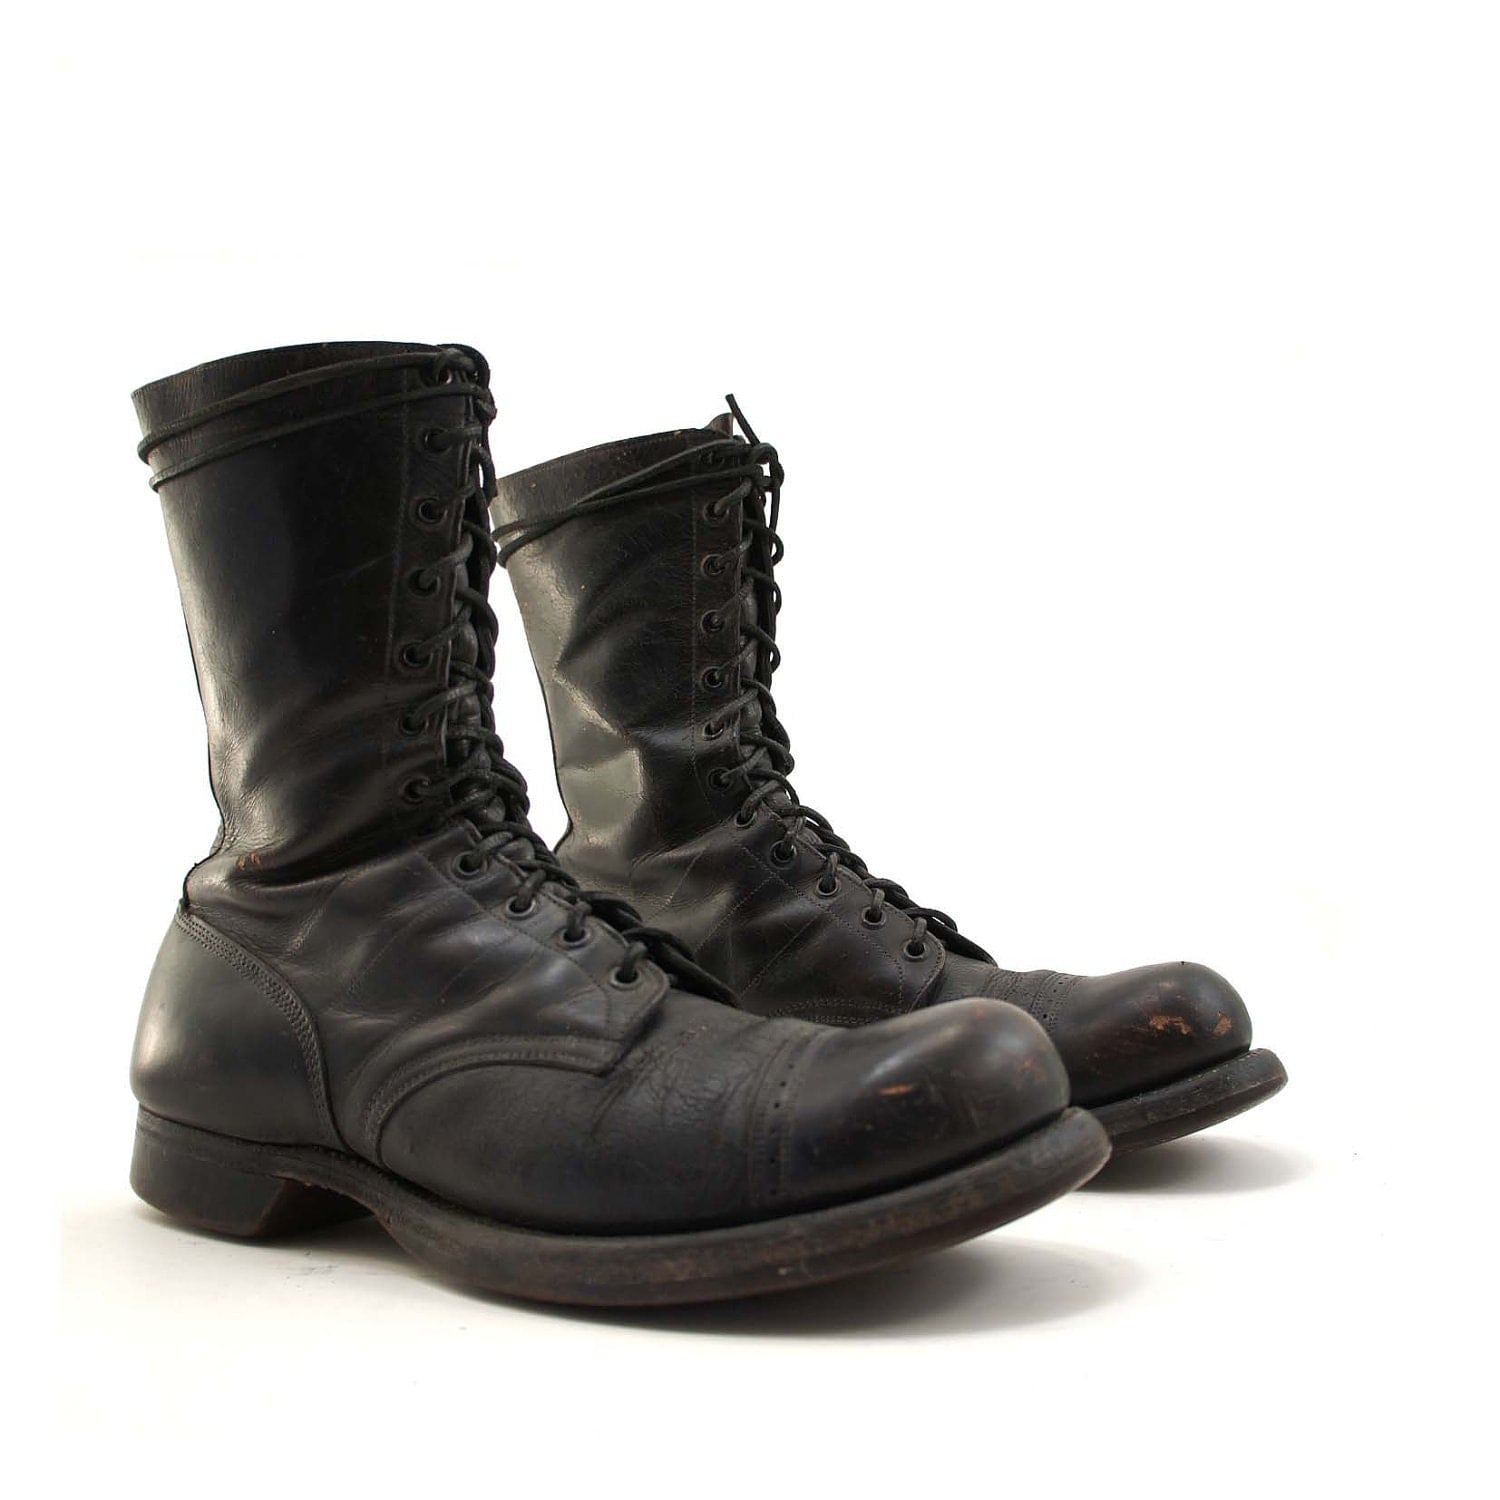 Reserved for Mike /// World War II Sky Master Jump Boots in a